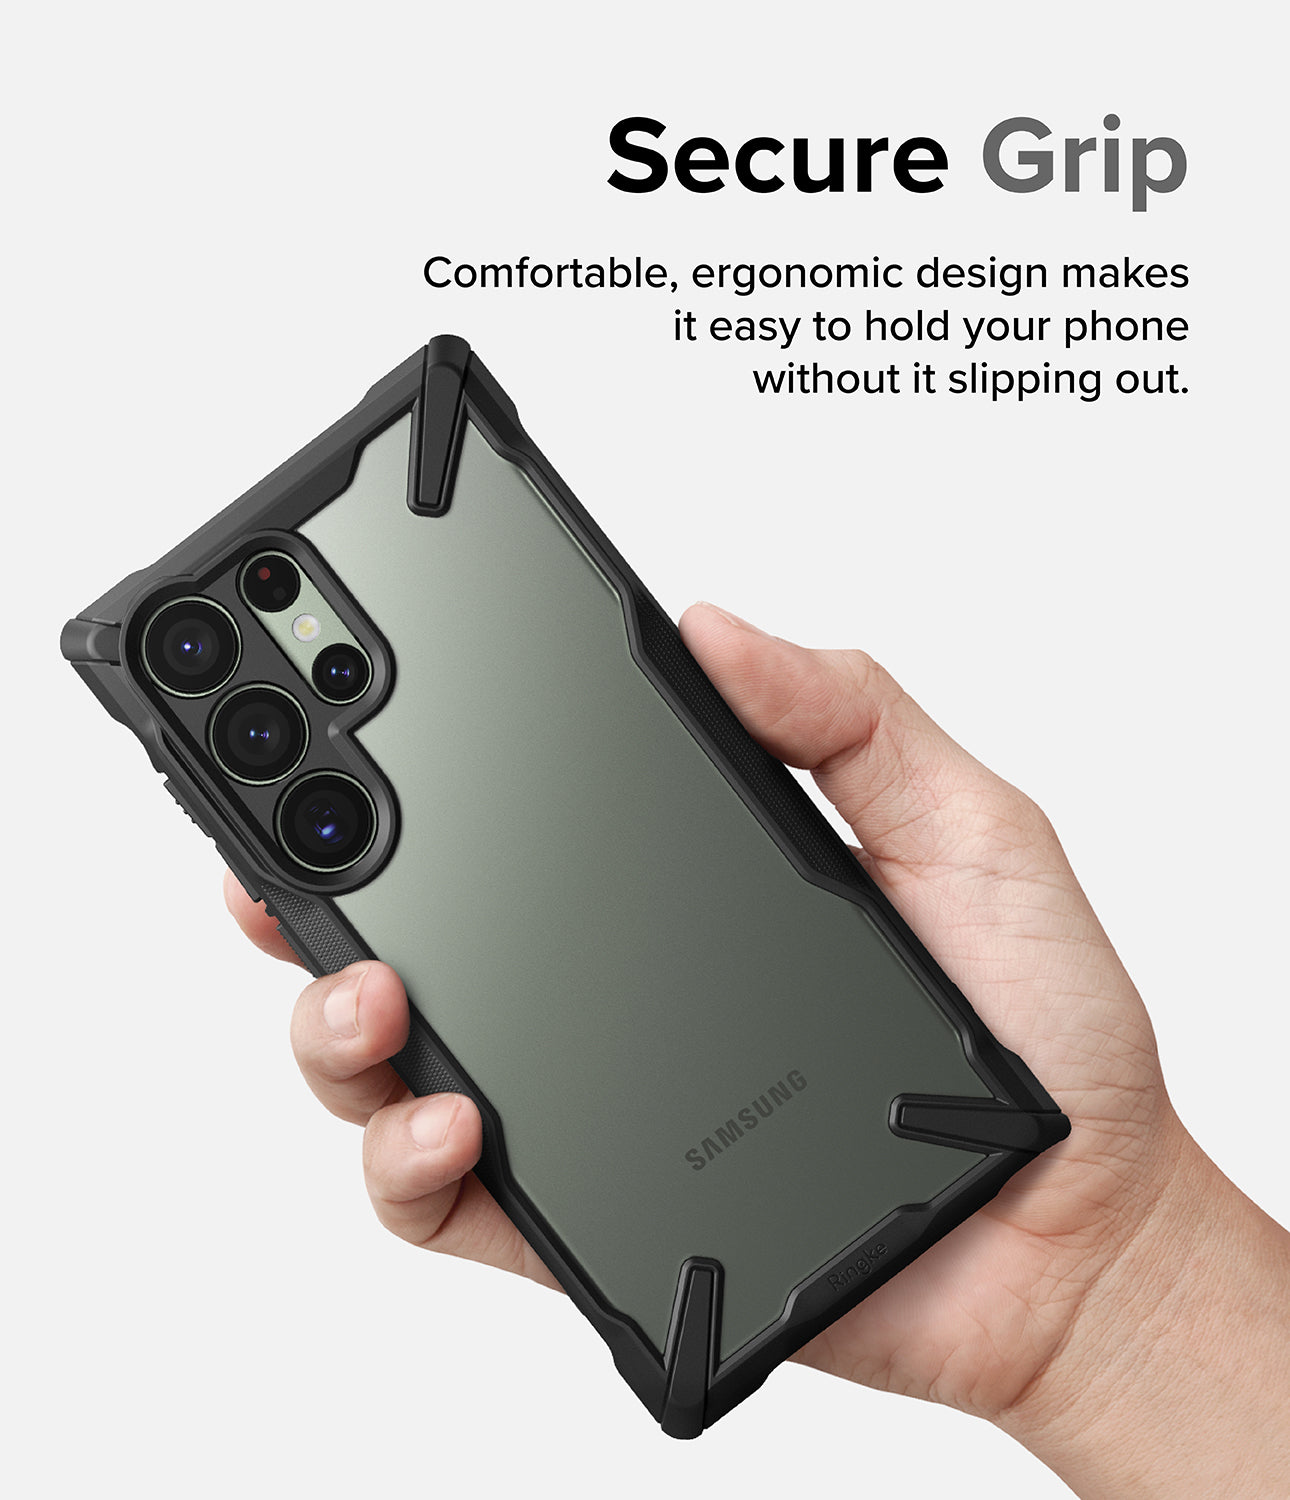 Galaxy S23 Ultra Case | Fusion-X - Black - Secure Grip. Comfortable, ergonomic design makes it easy to hold your phone without it slipping out.